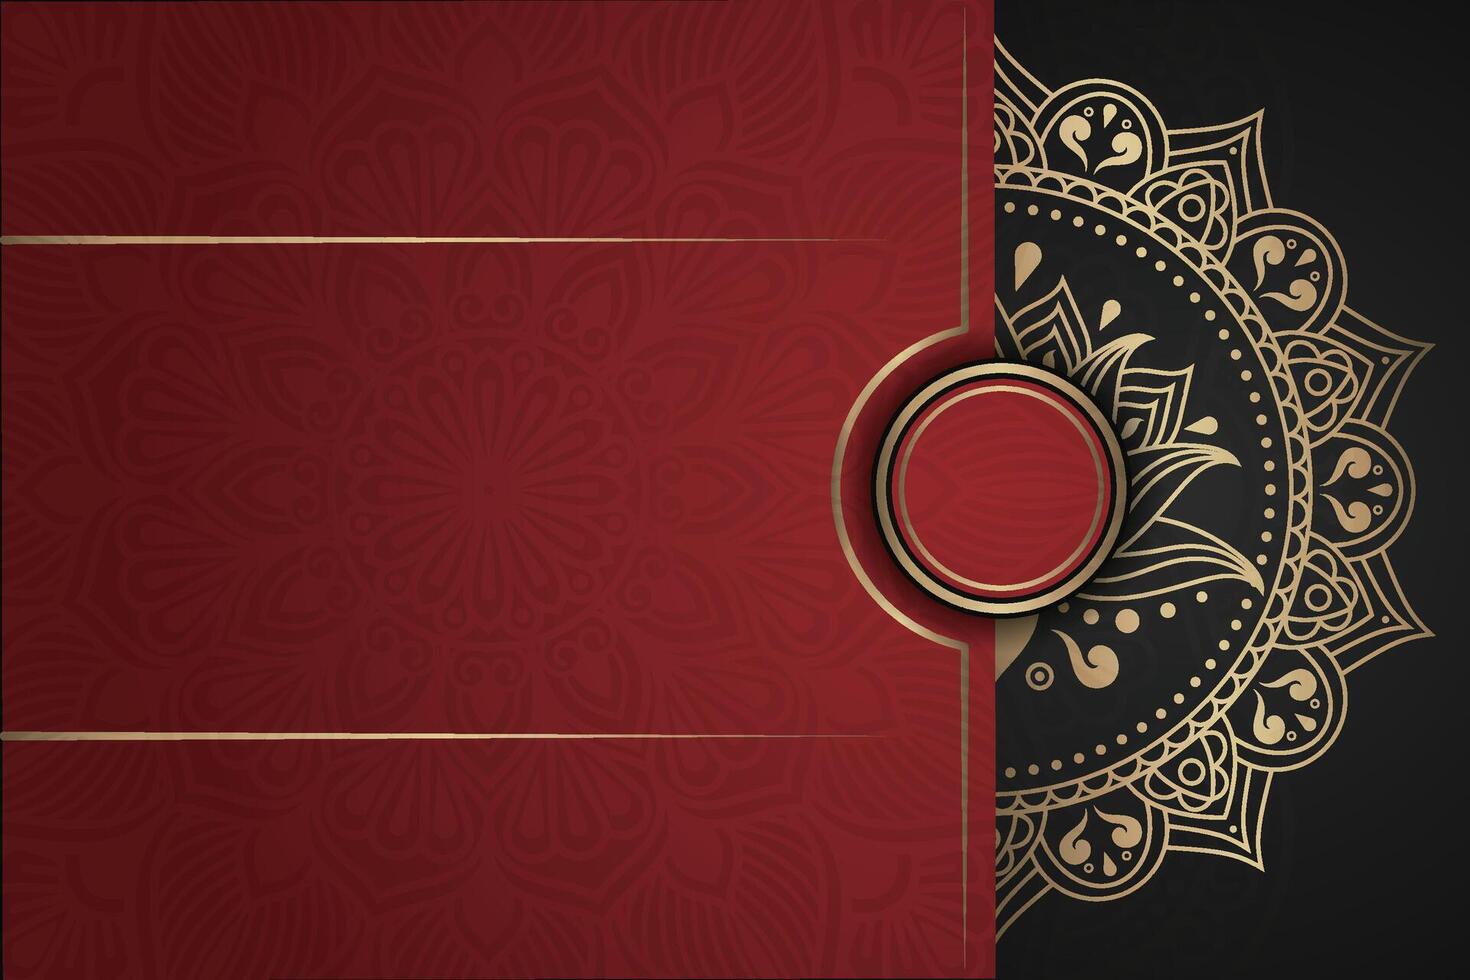 Luxurious background and banner design, suitable for design templates for greeting cards, postcards, invitations, posters, flyers. vector